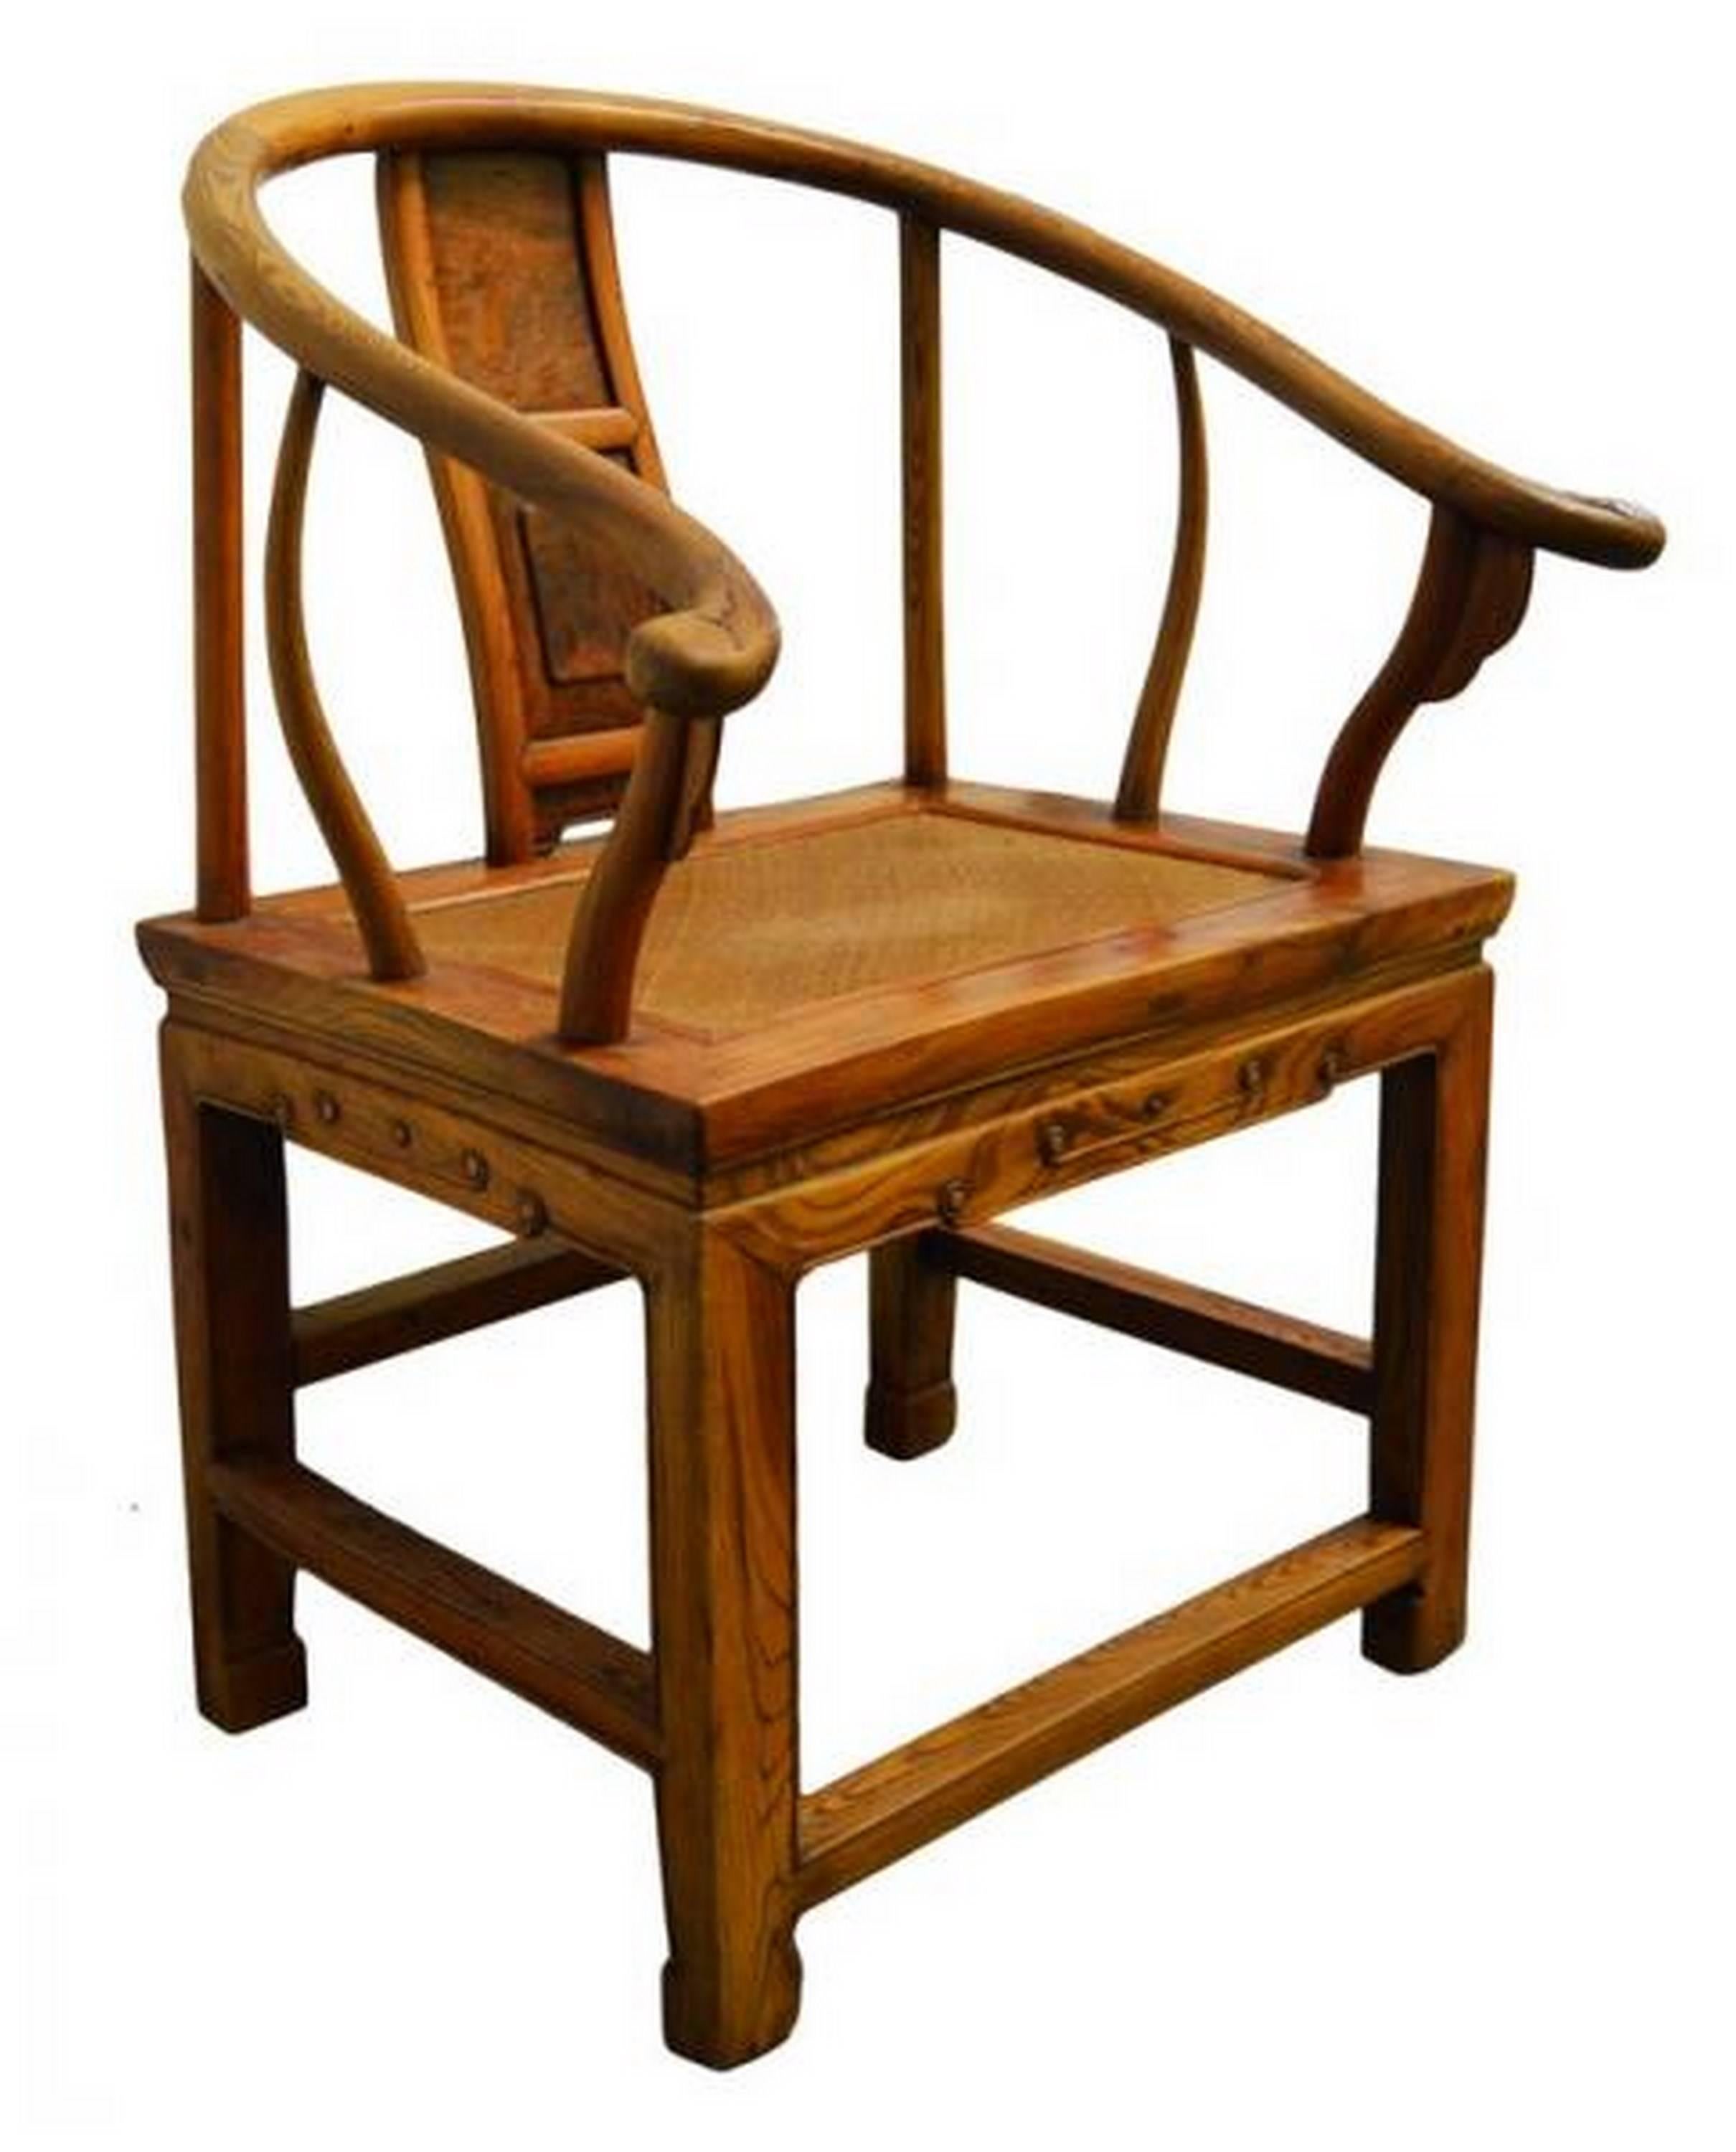 This Chinese 19th century chair with horseshoe back features a rattan seat and is covered with a light brown lacquer. The chair features a refined square base with carved scroll details on the sides, supporting a rattan seat. The back adopts a